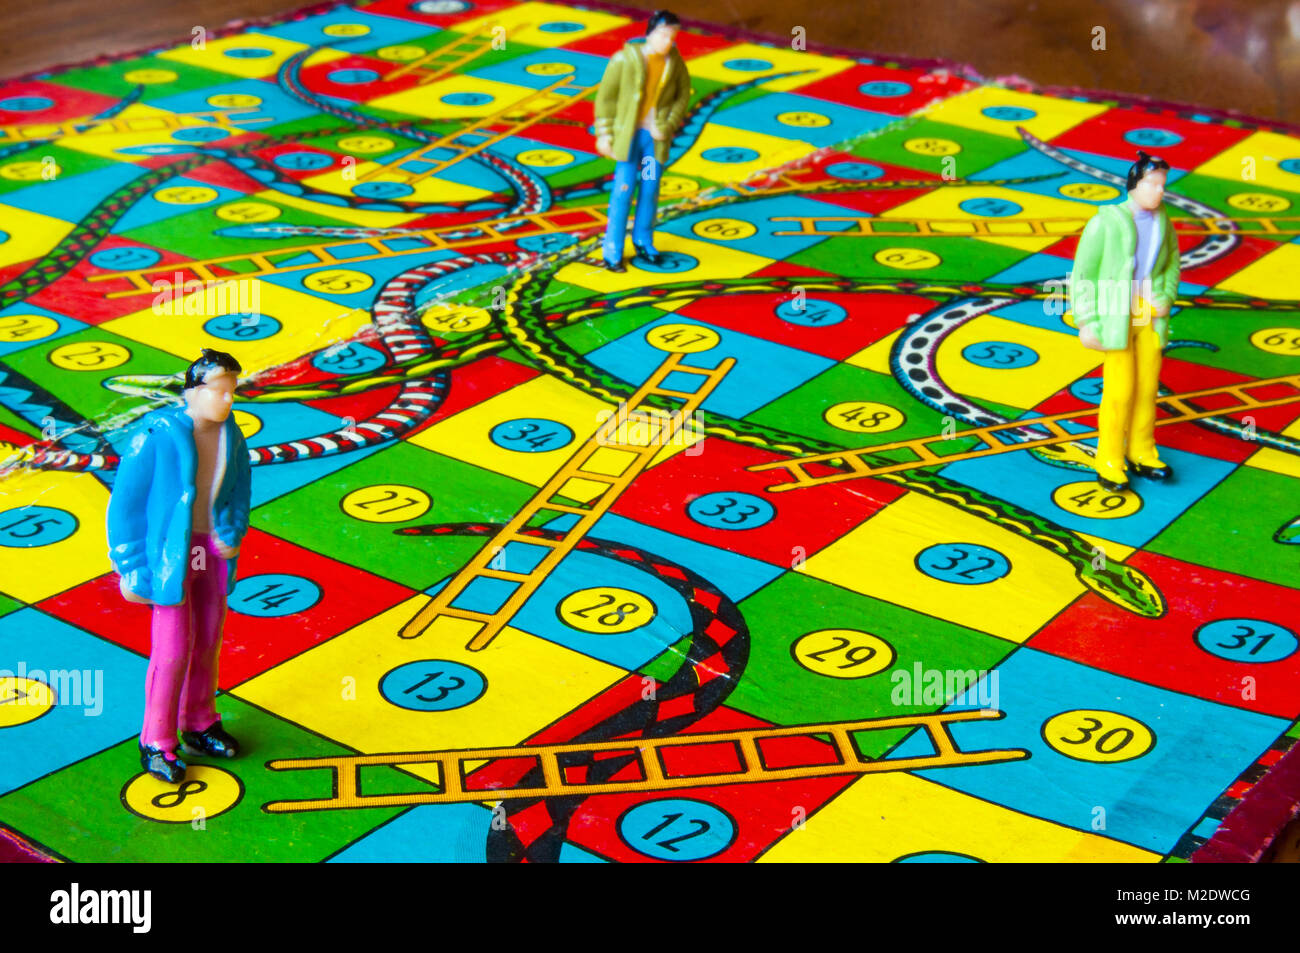 Retro snakes and ladders board with miniature human figures in studio setting, Melbourne, Australia Stock Photo